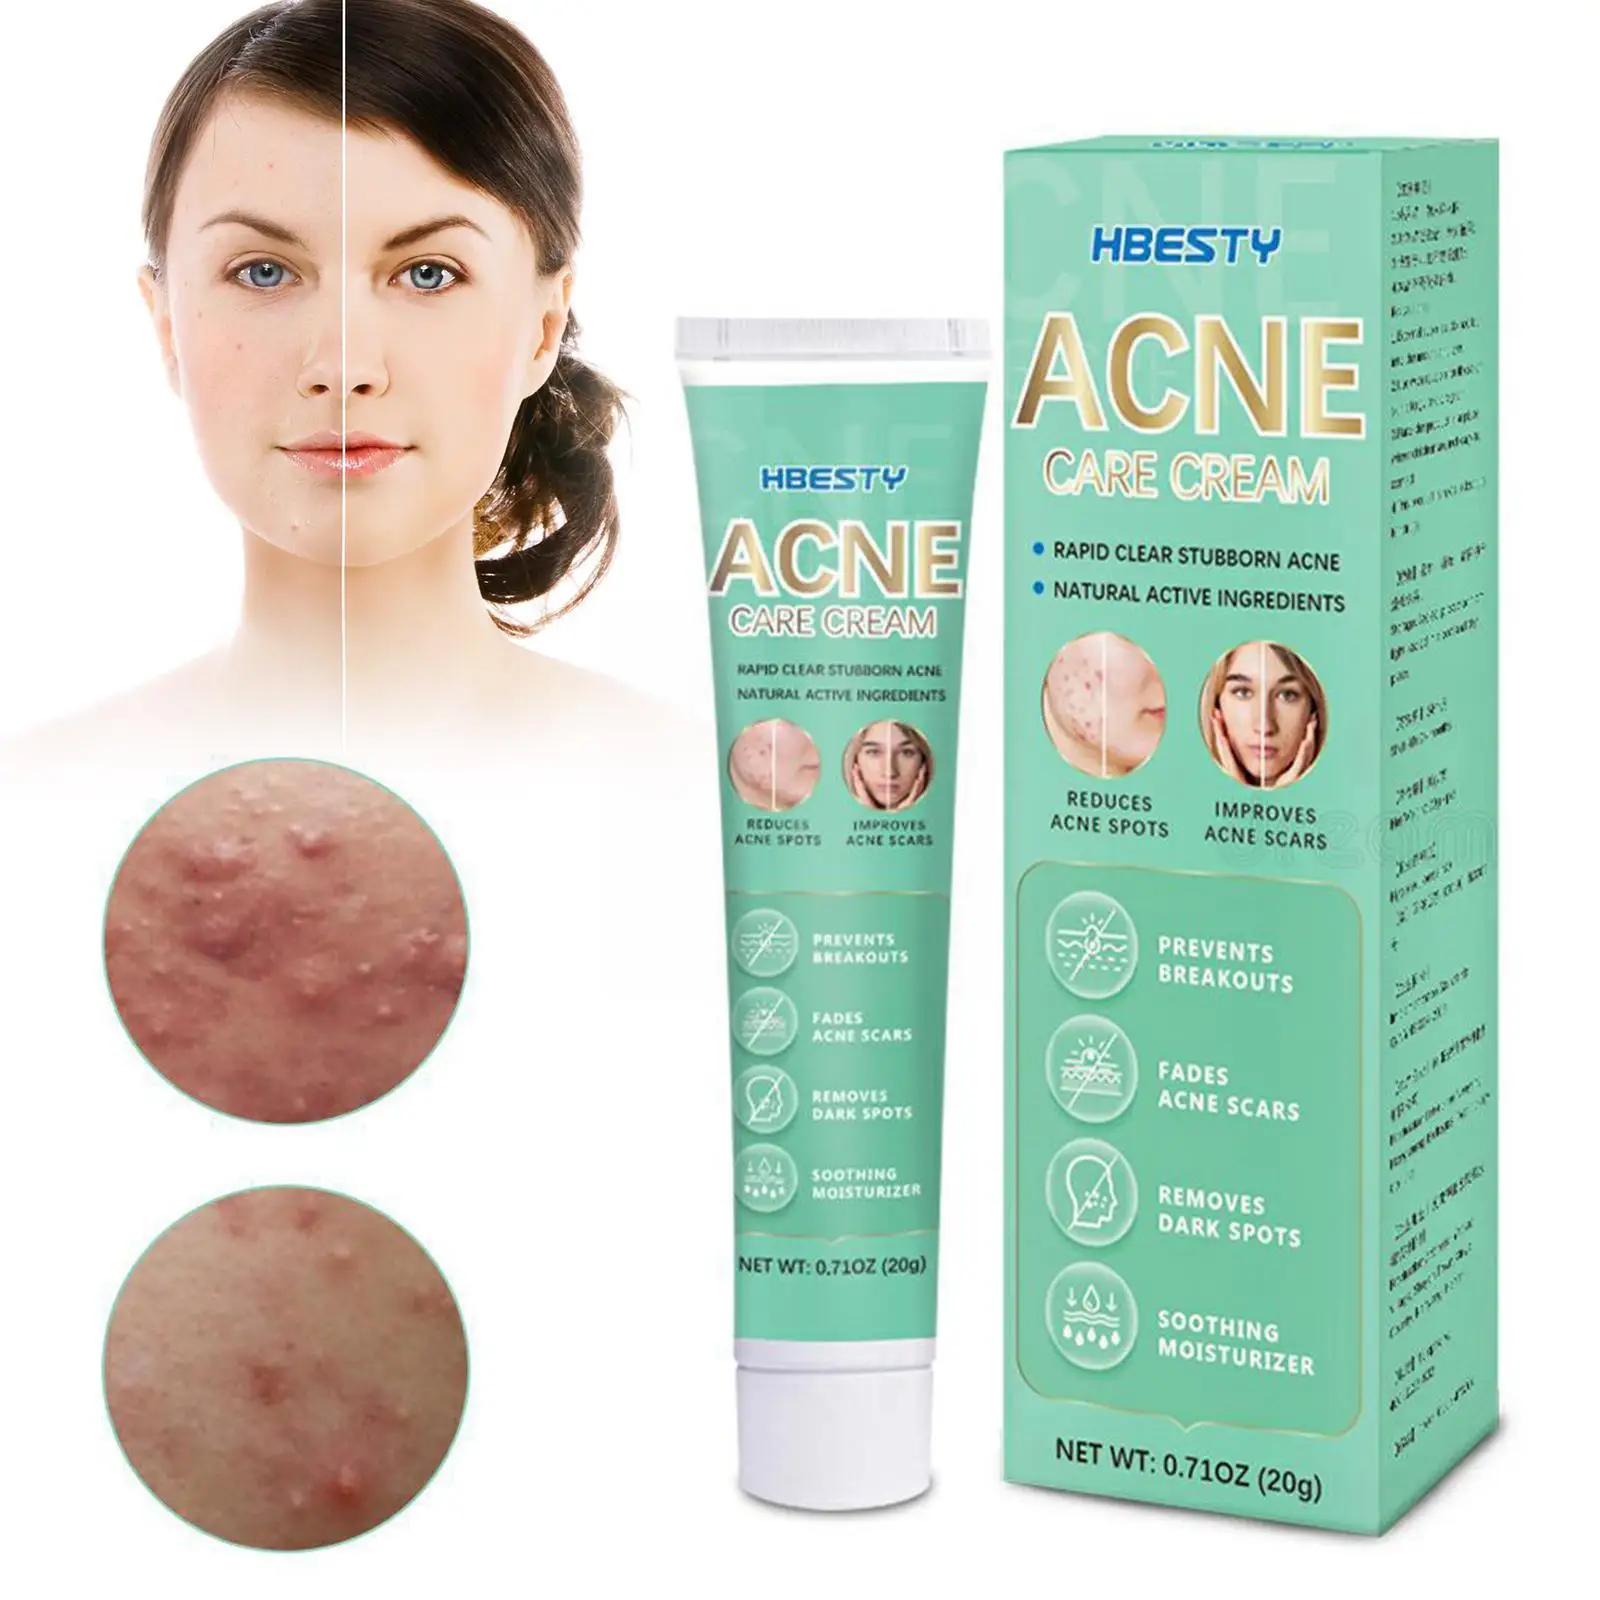 

20g Herbal Acne Treatment Face Cream Anti-Acne Gel Face Shrink Removal Pores Mark Pimples Acne Eliminate Care Whitening G5I4